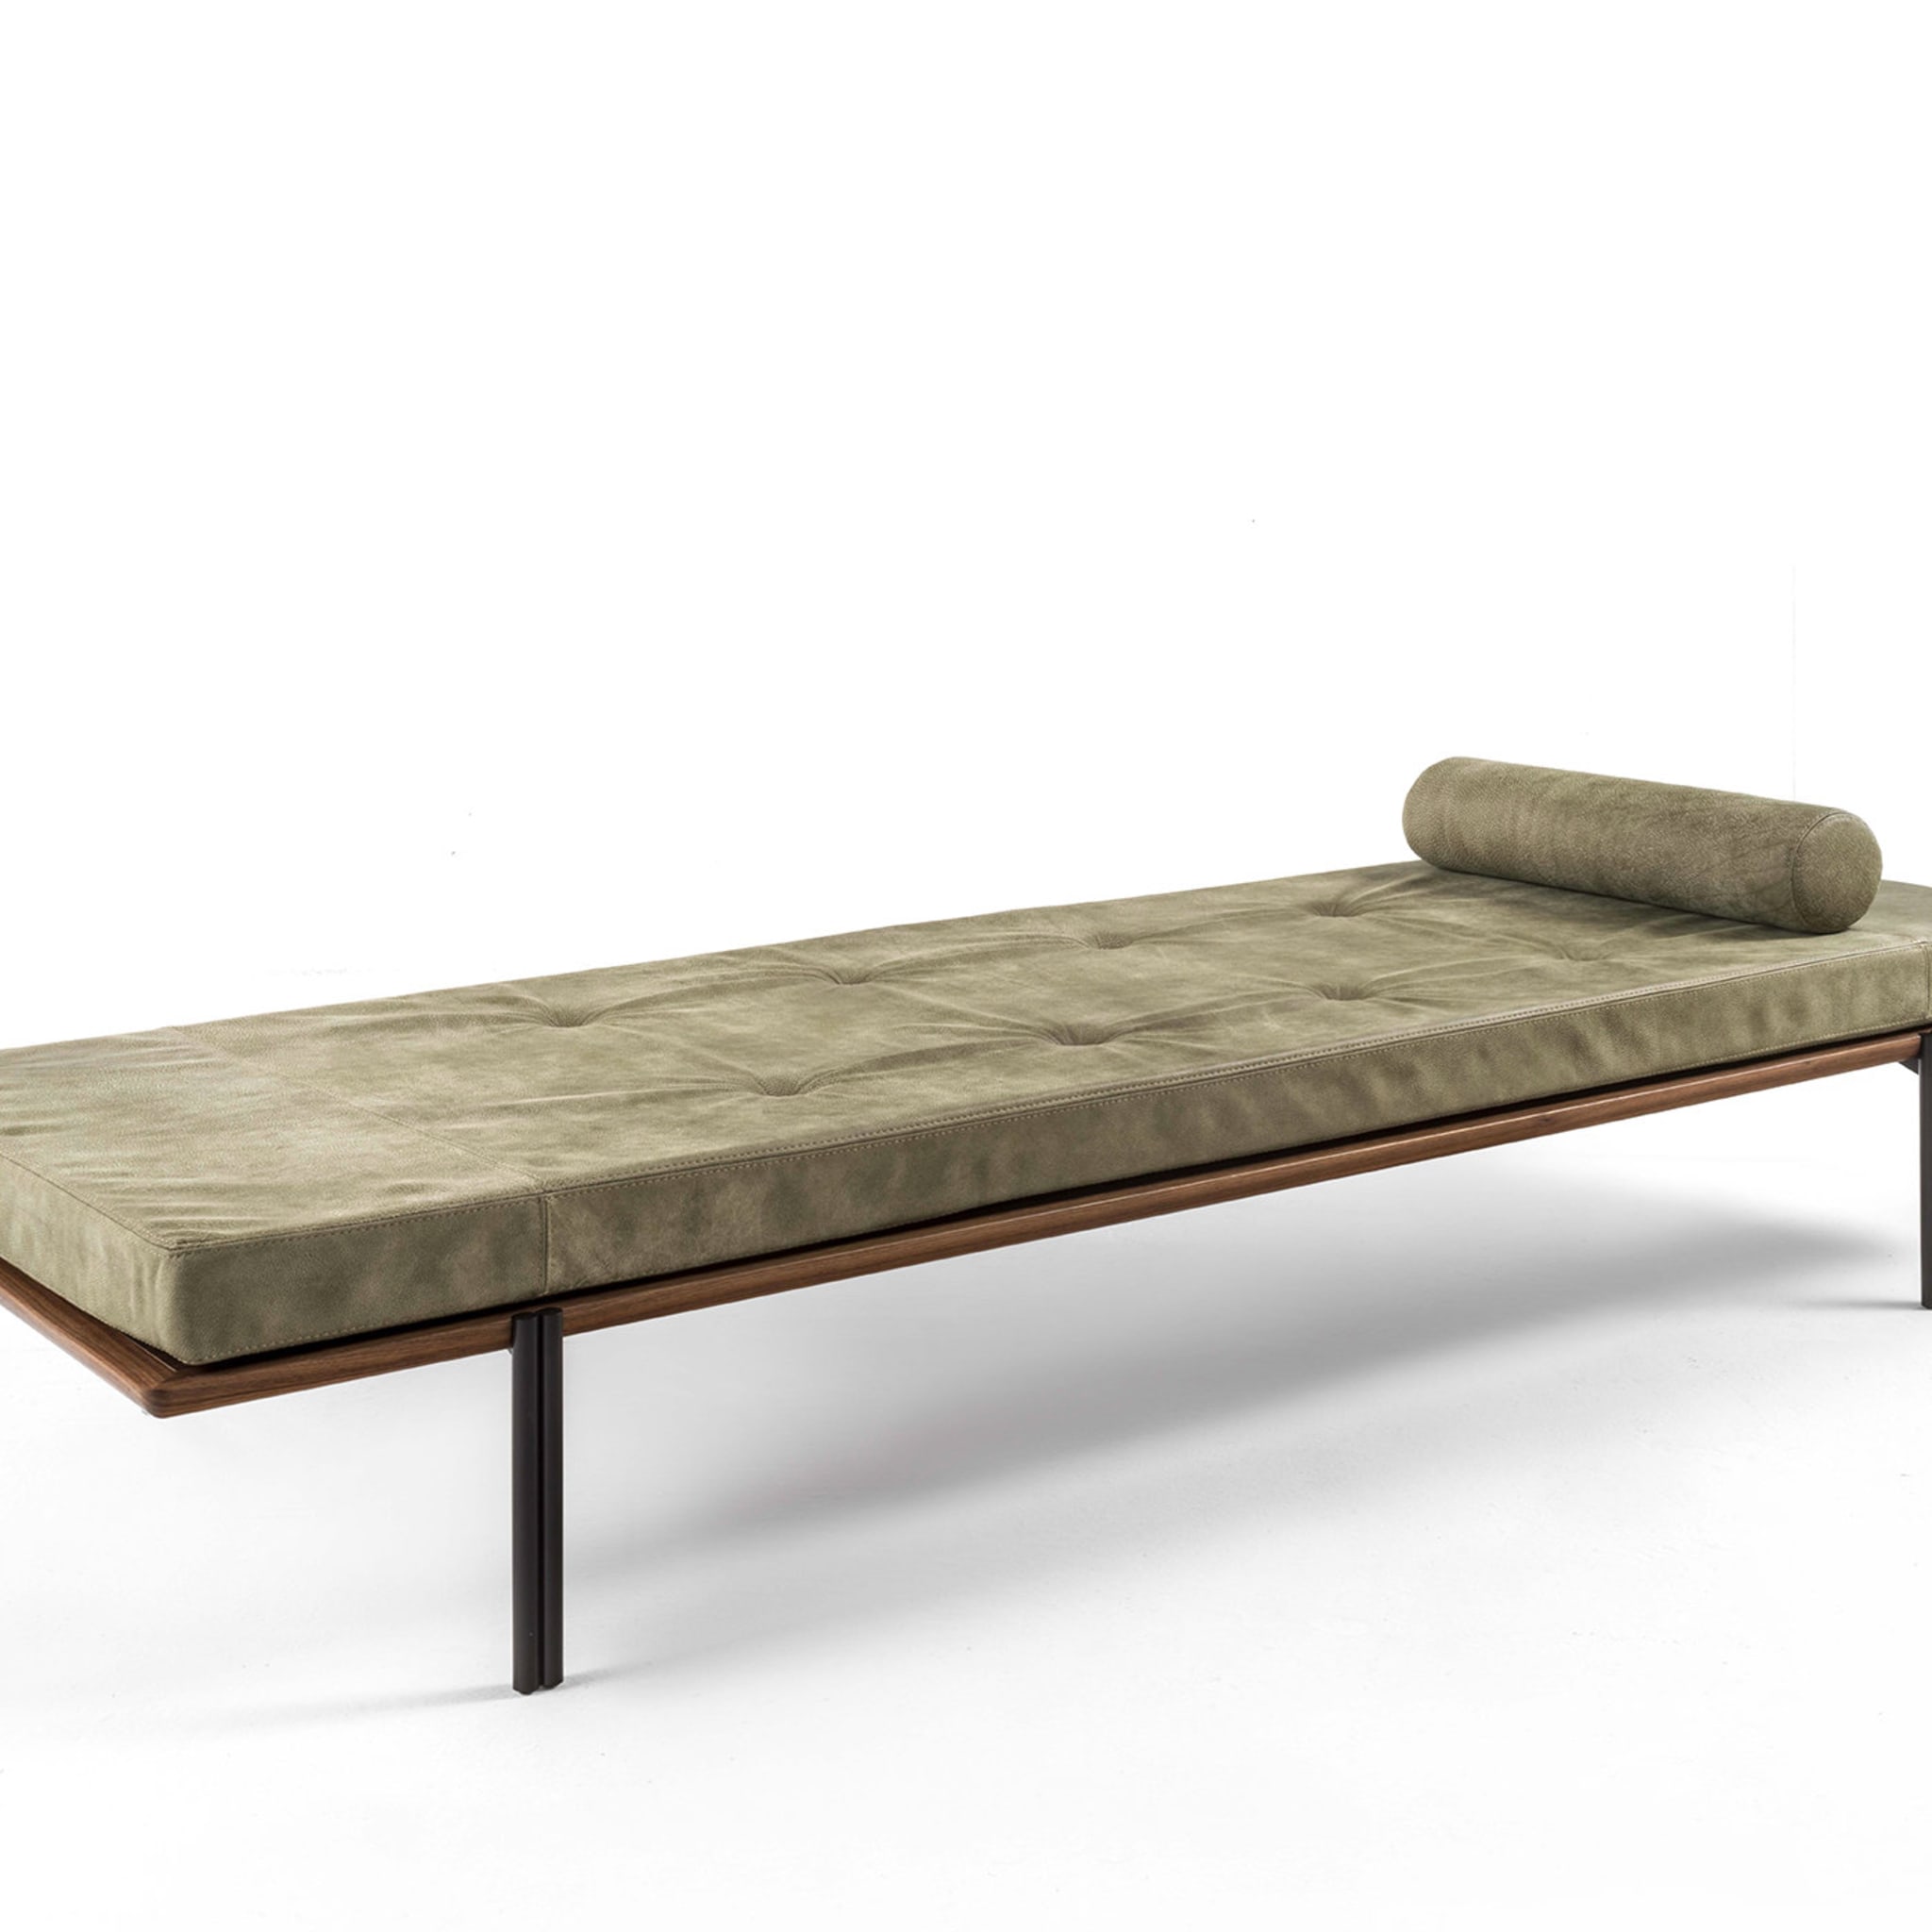 Jean daybed - Alternative view 1